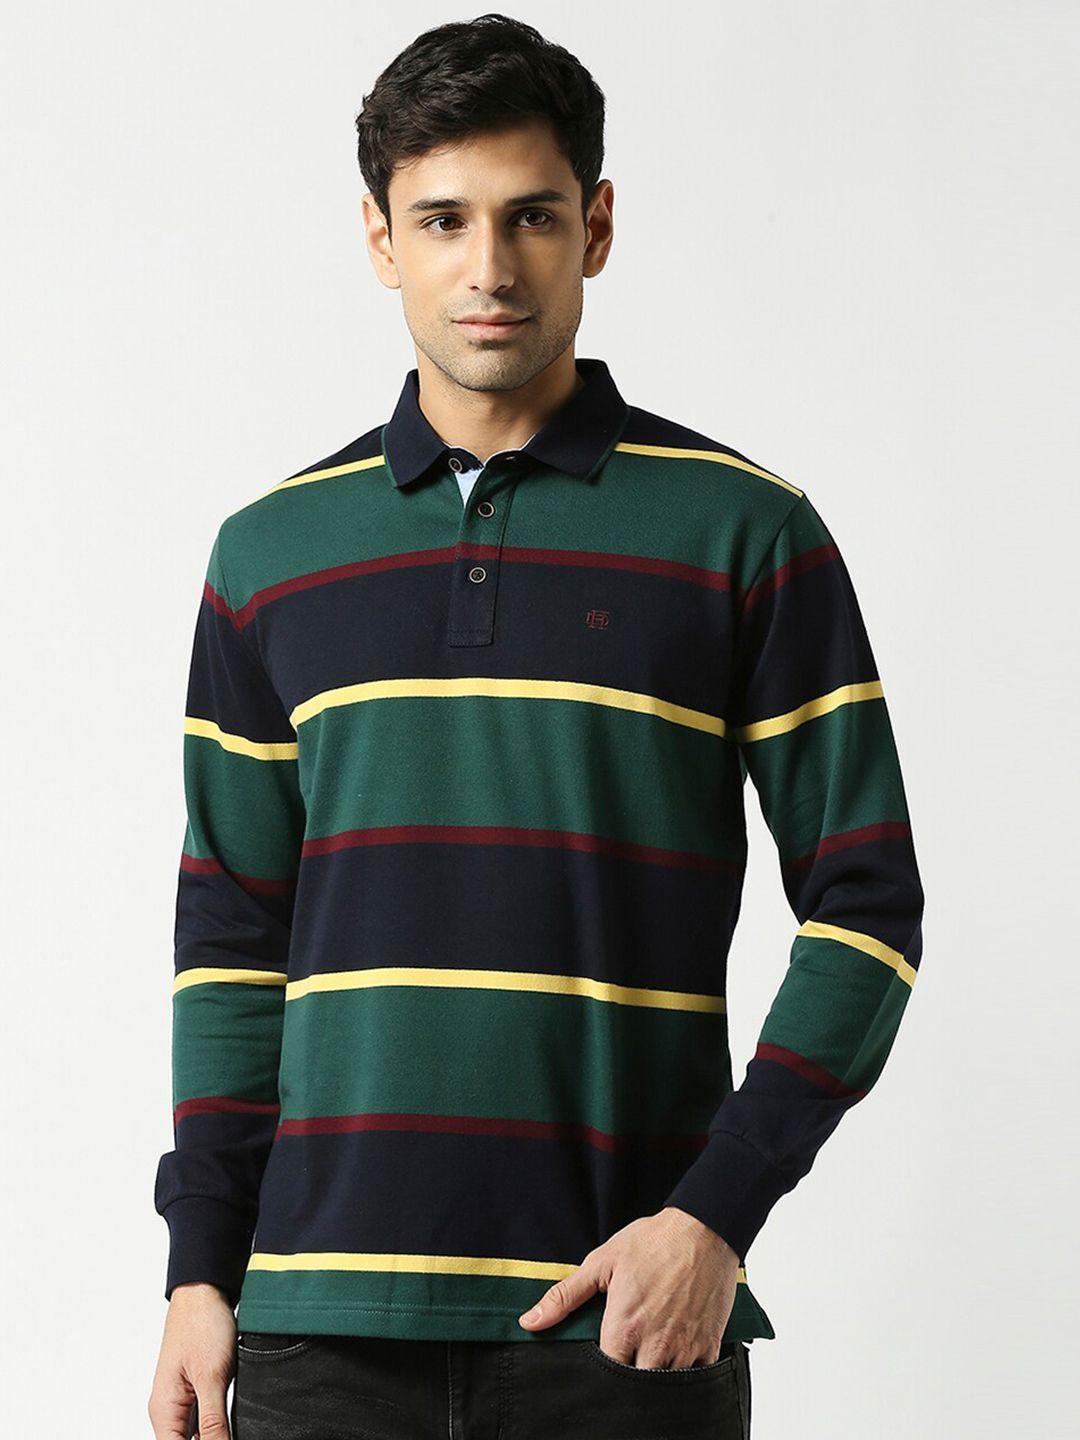 dragon hill striped polo collar long sleeves slim fit cotton t-shirt